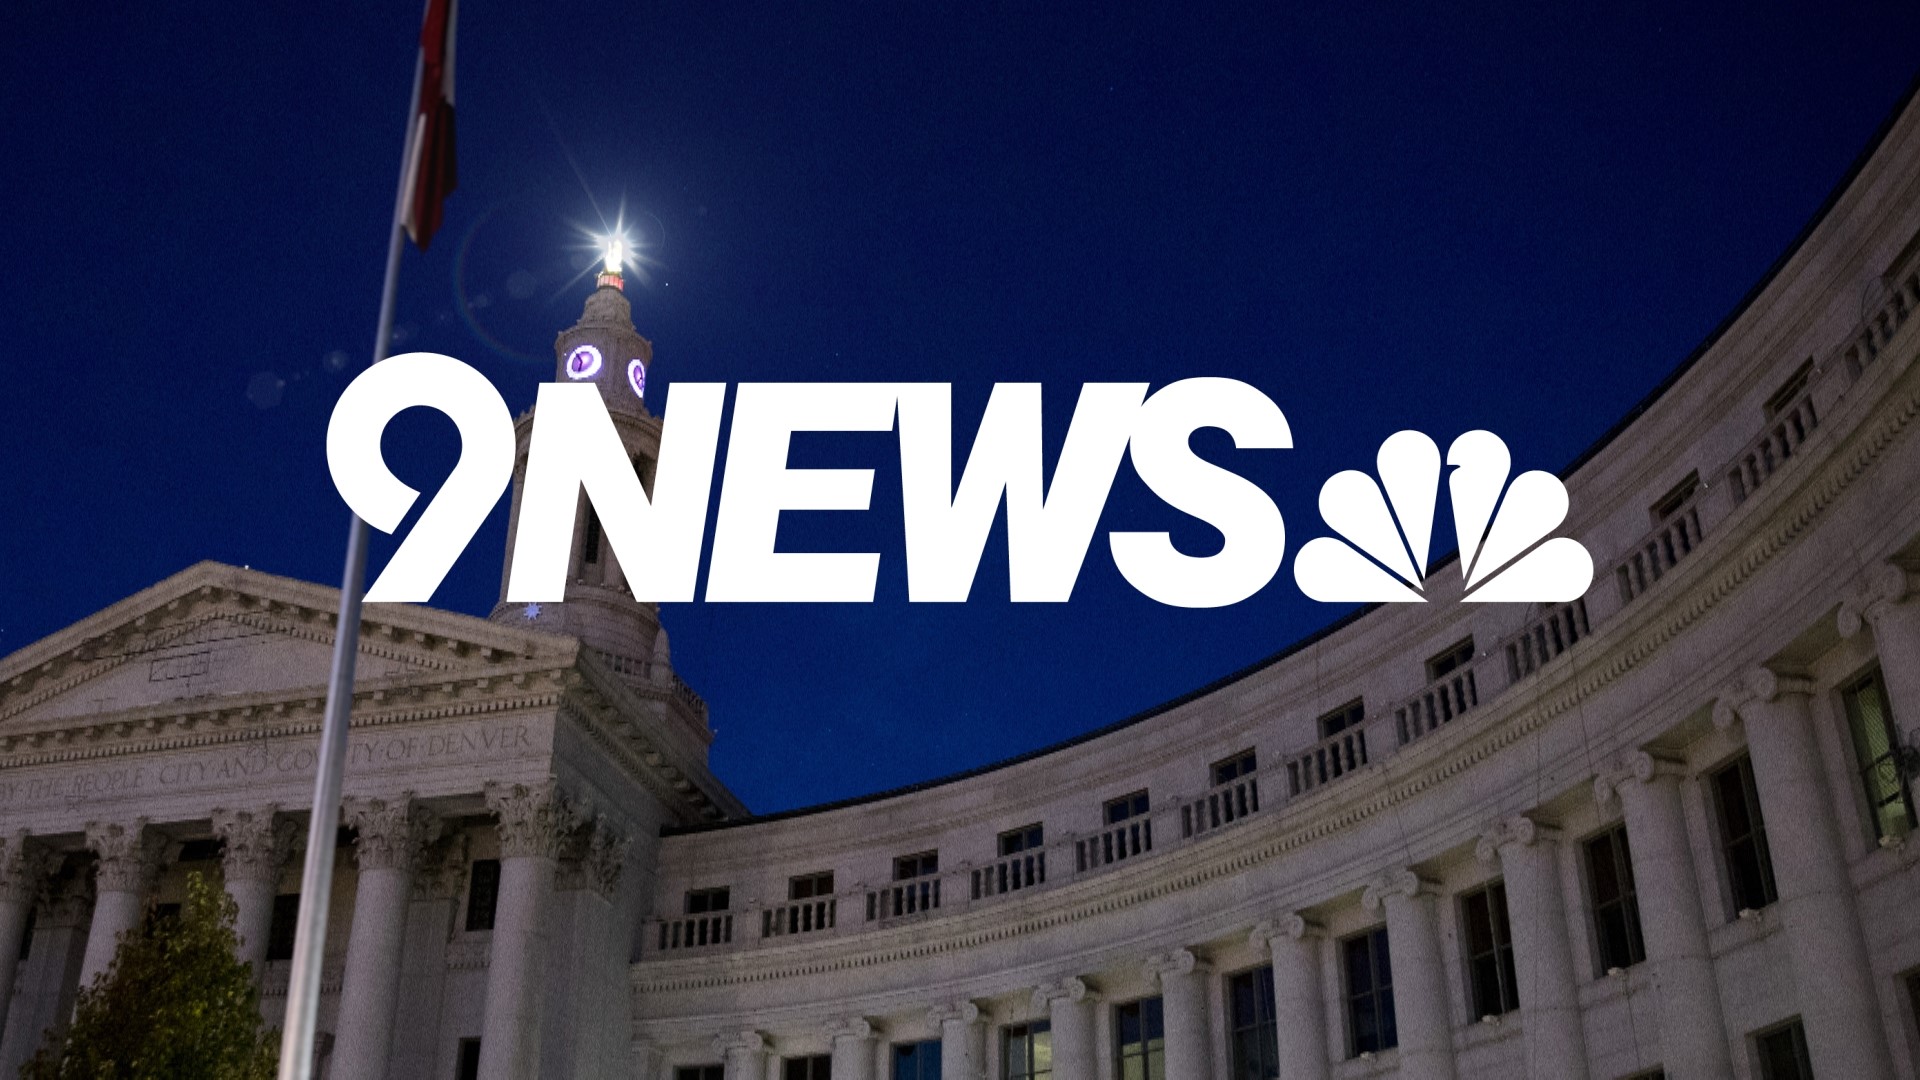 Current news and events of the day, local topics in the Denver area, weather forecasts, sports scores and road conditions are covered by the 9NEWS team.